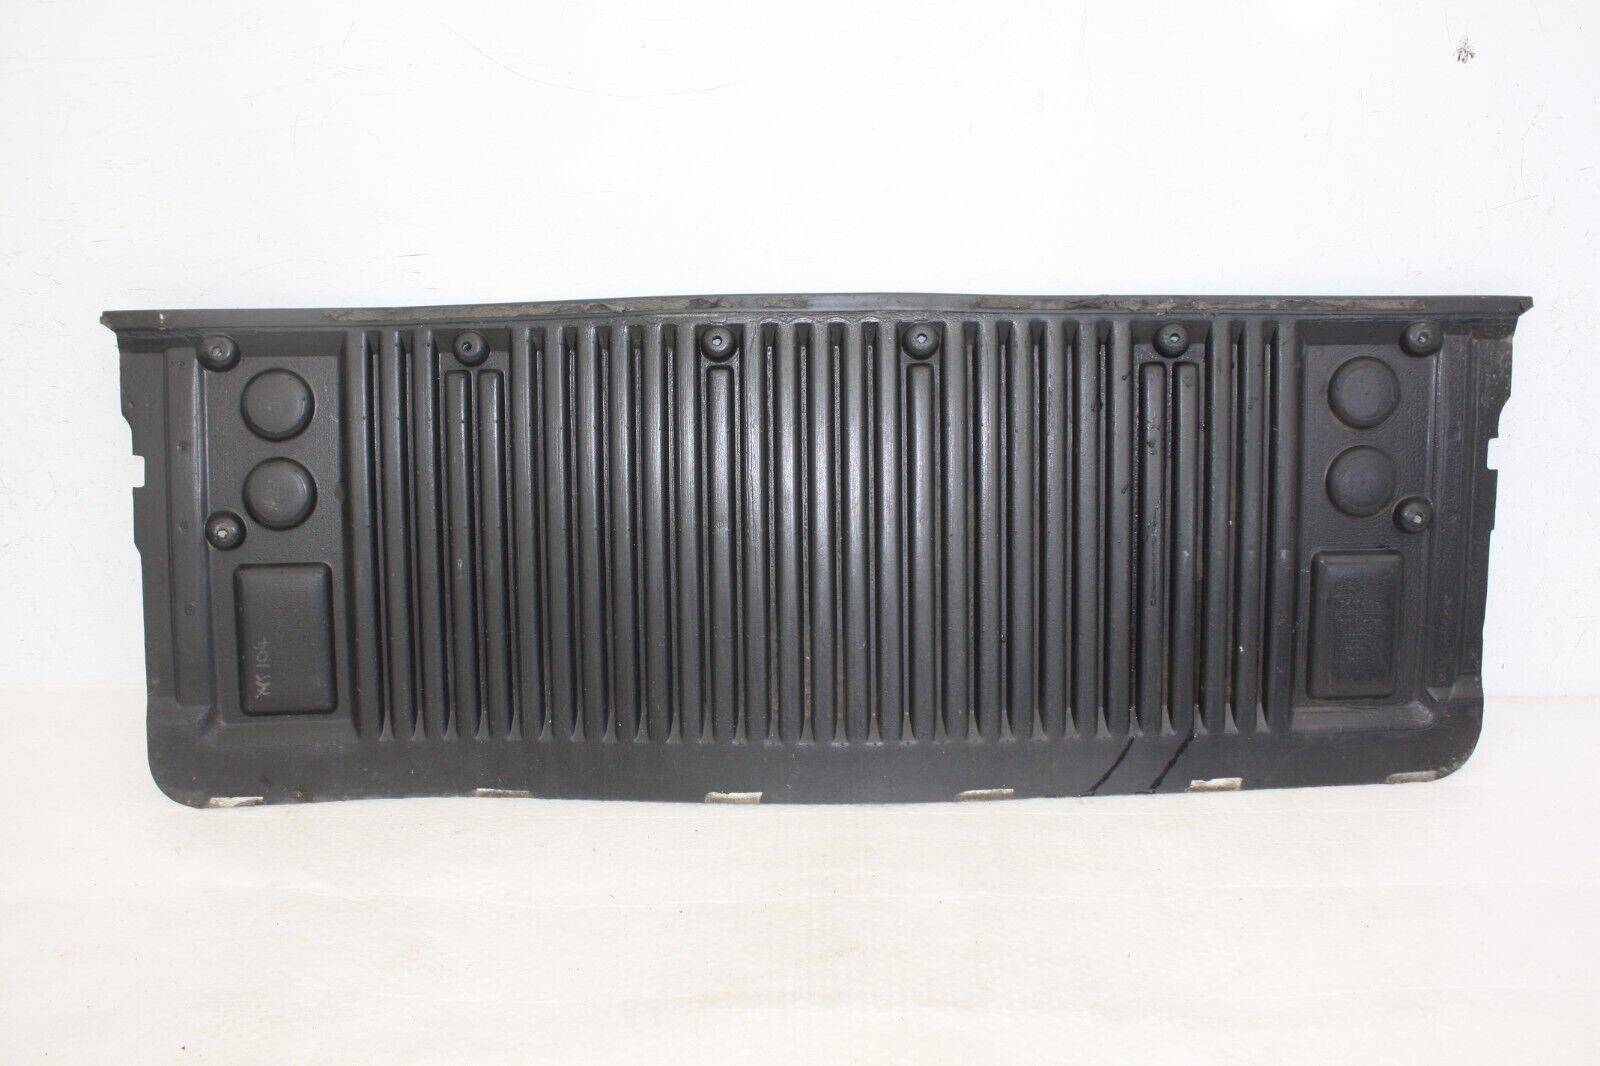 Ford Ranger Tailgate Liner Protector Cover AB39 2140726 Genuine 176321614493